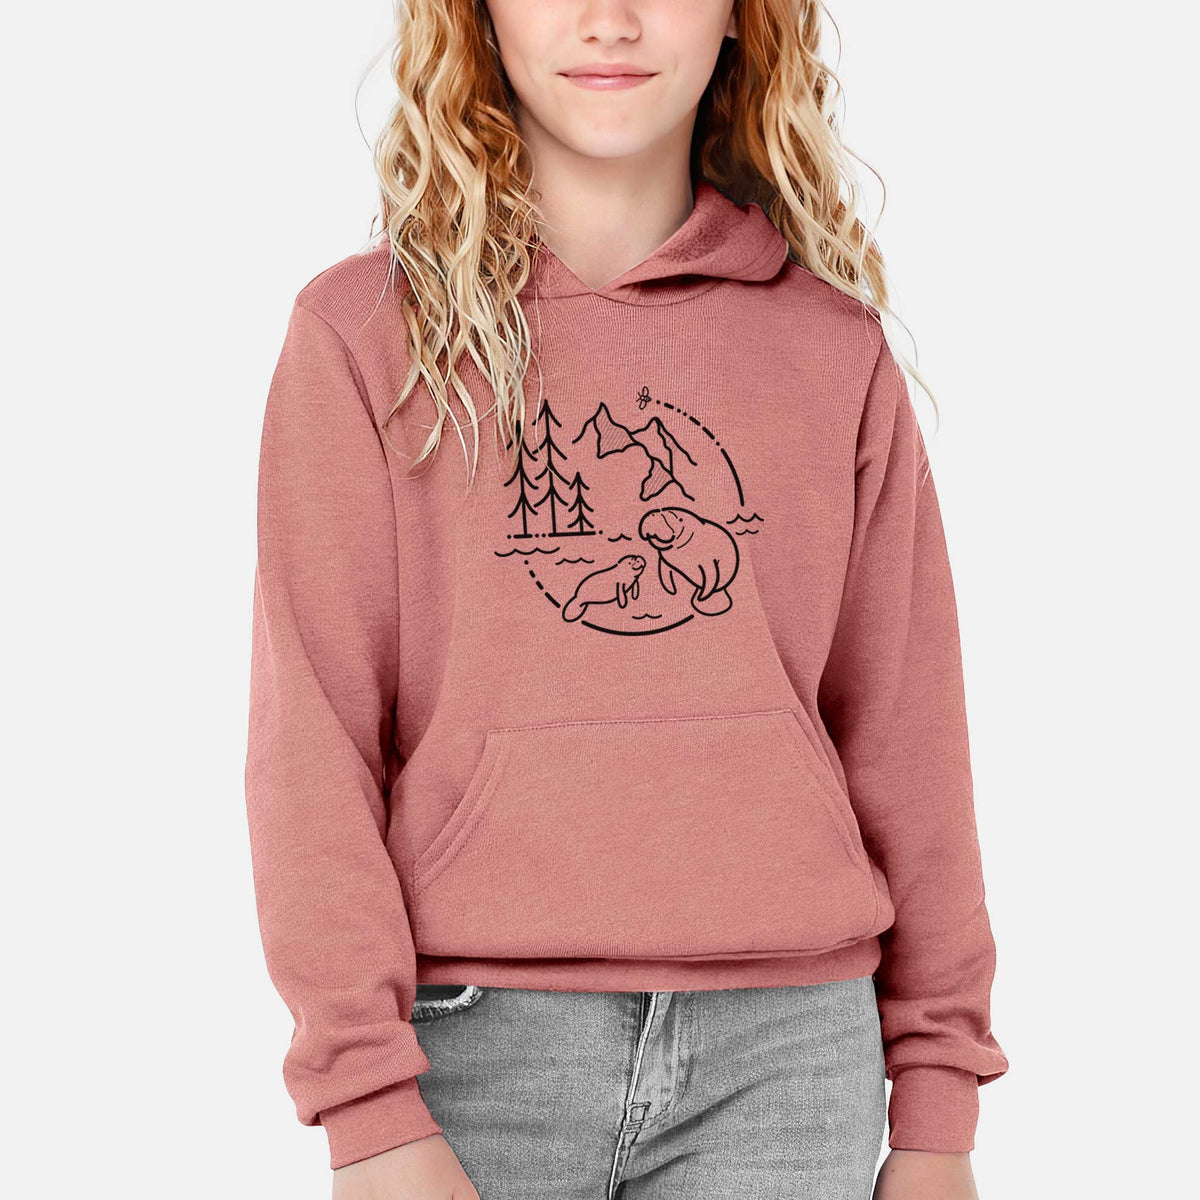 It&#39;s All Connected - Manatee - Youth Hoodie Sweatshirt